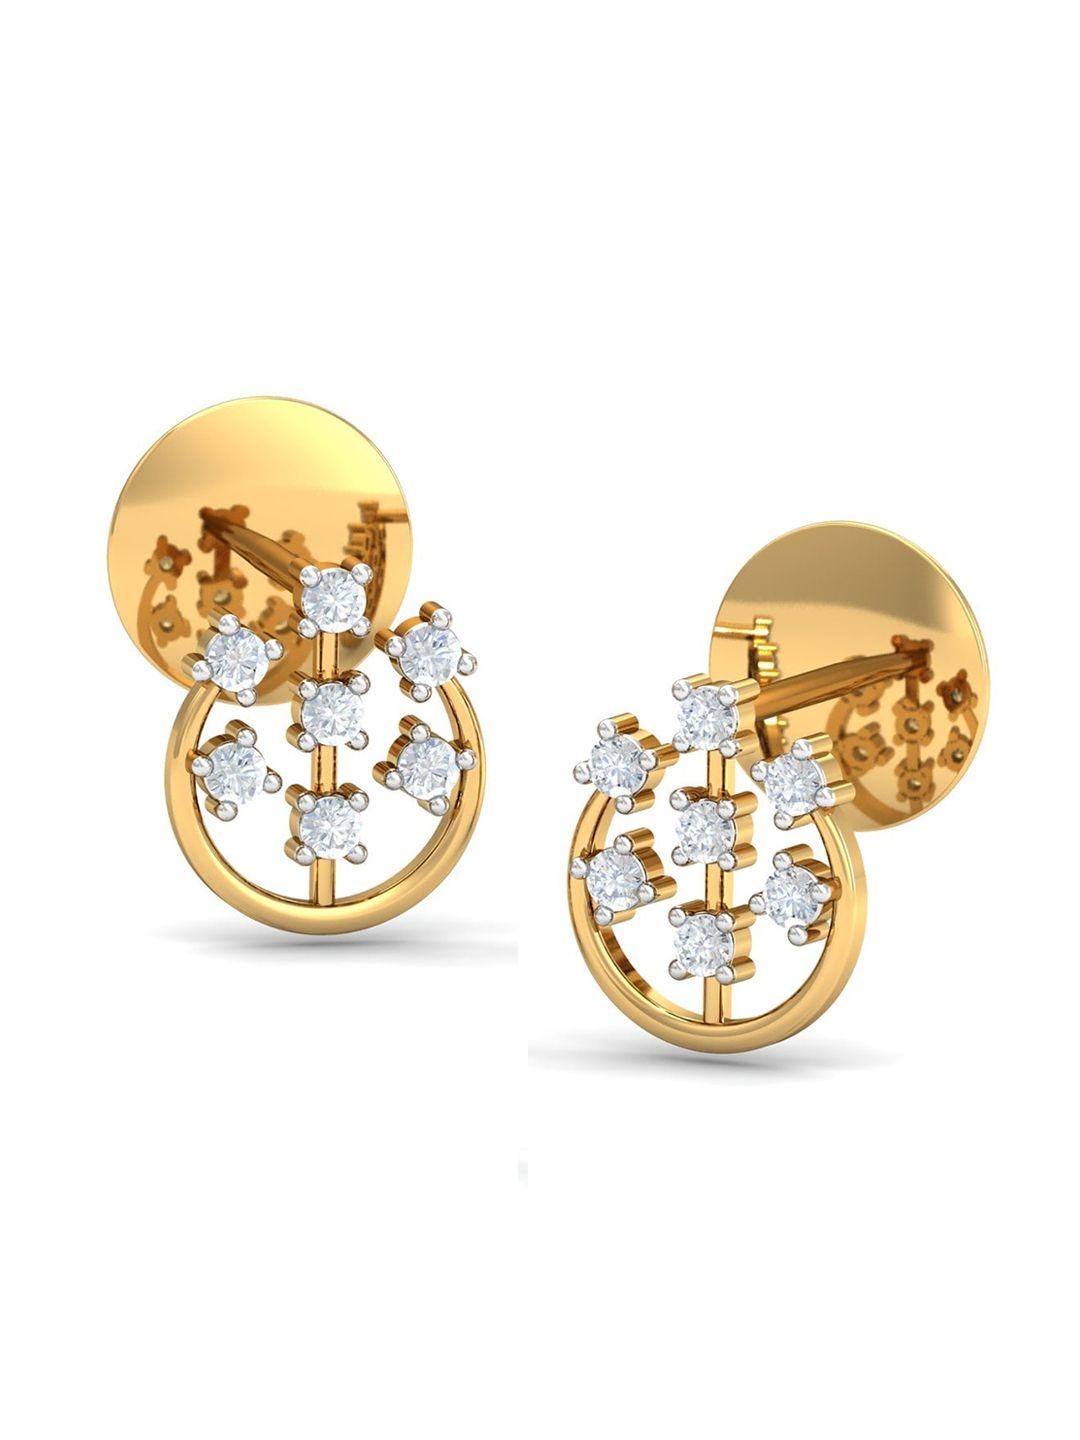 kuberbox-floral-charm-18kt-gold-diamond-studded-earrings--1.8-gm